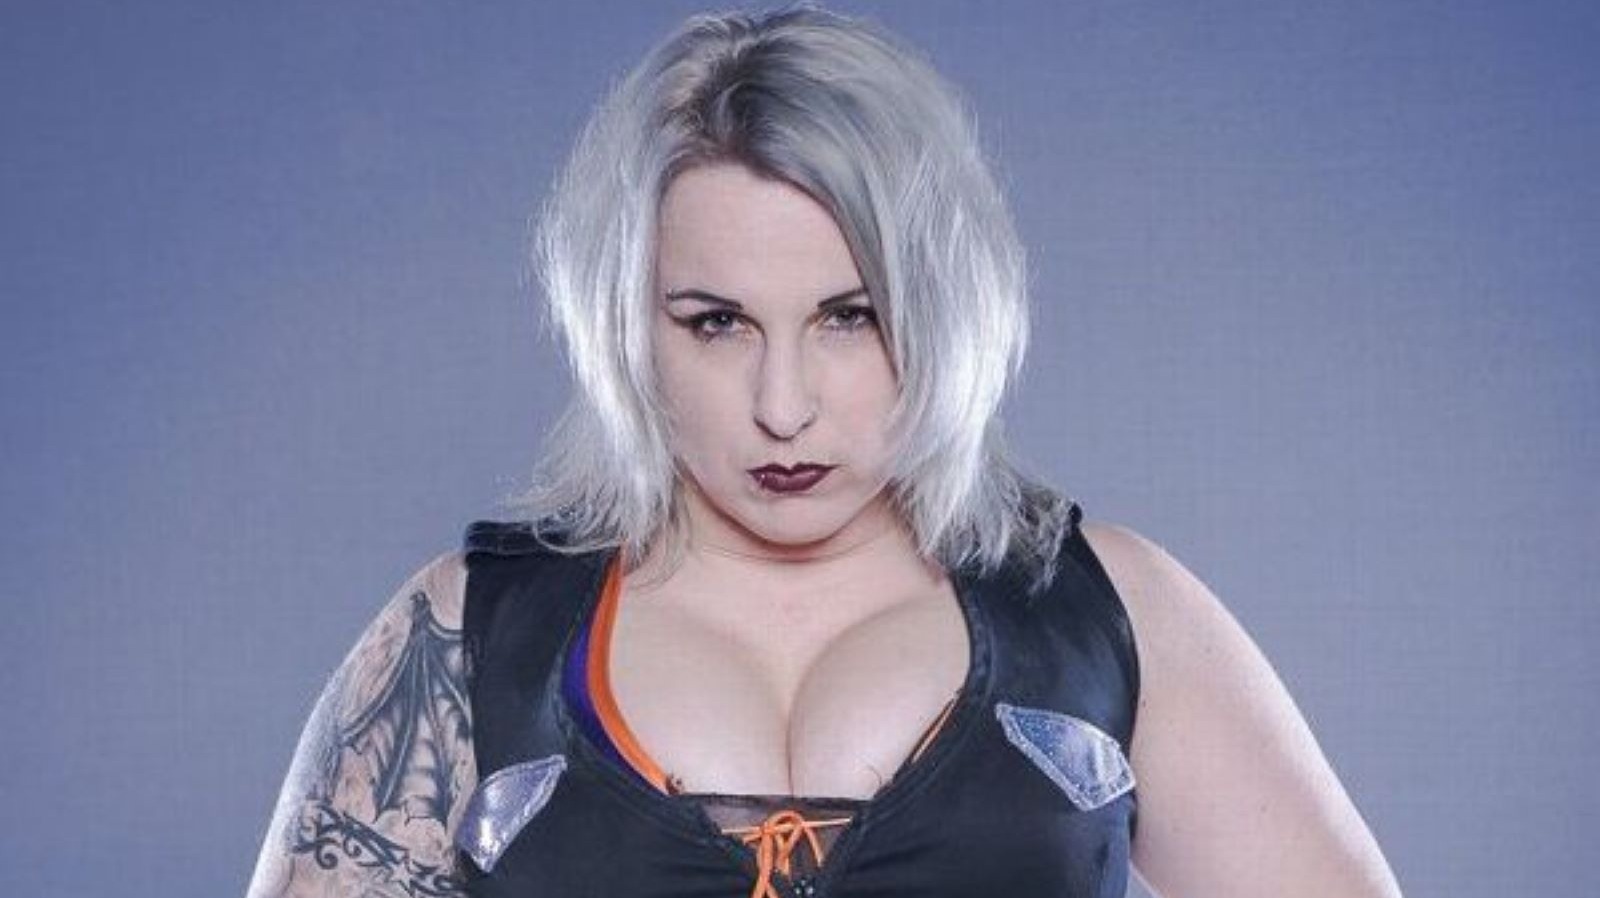 LuFisto Details Issues With Her AEW Experience, Dustin Rhodes Responds